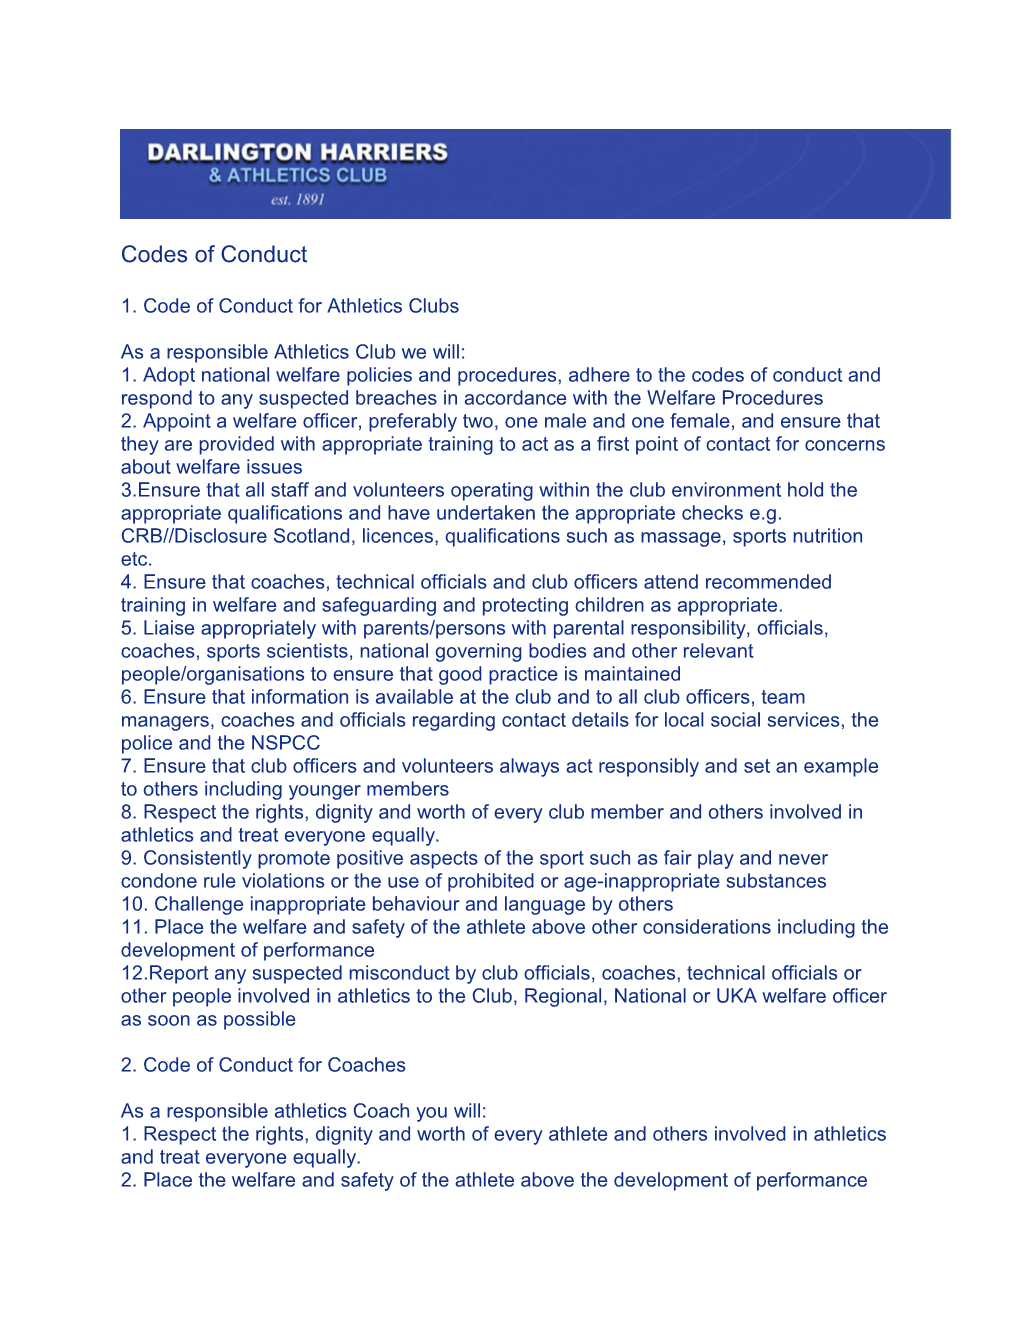 1. Code of Conduct for Athletics Clubs